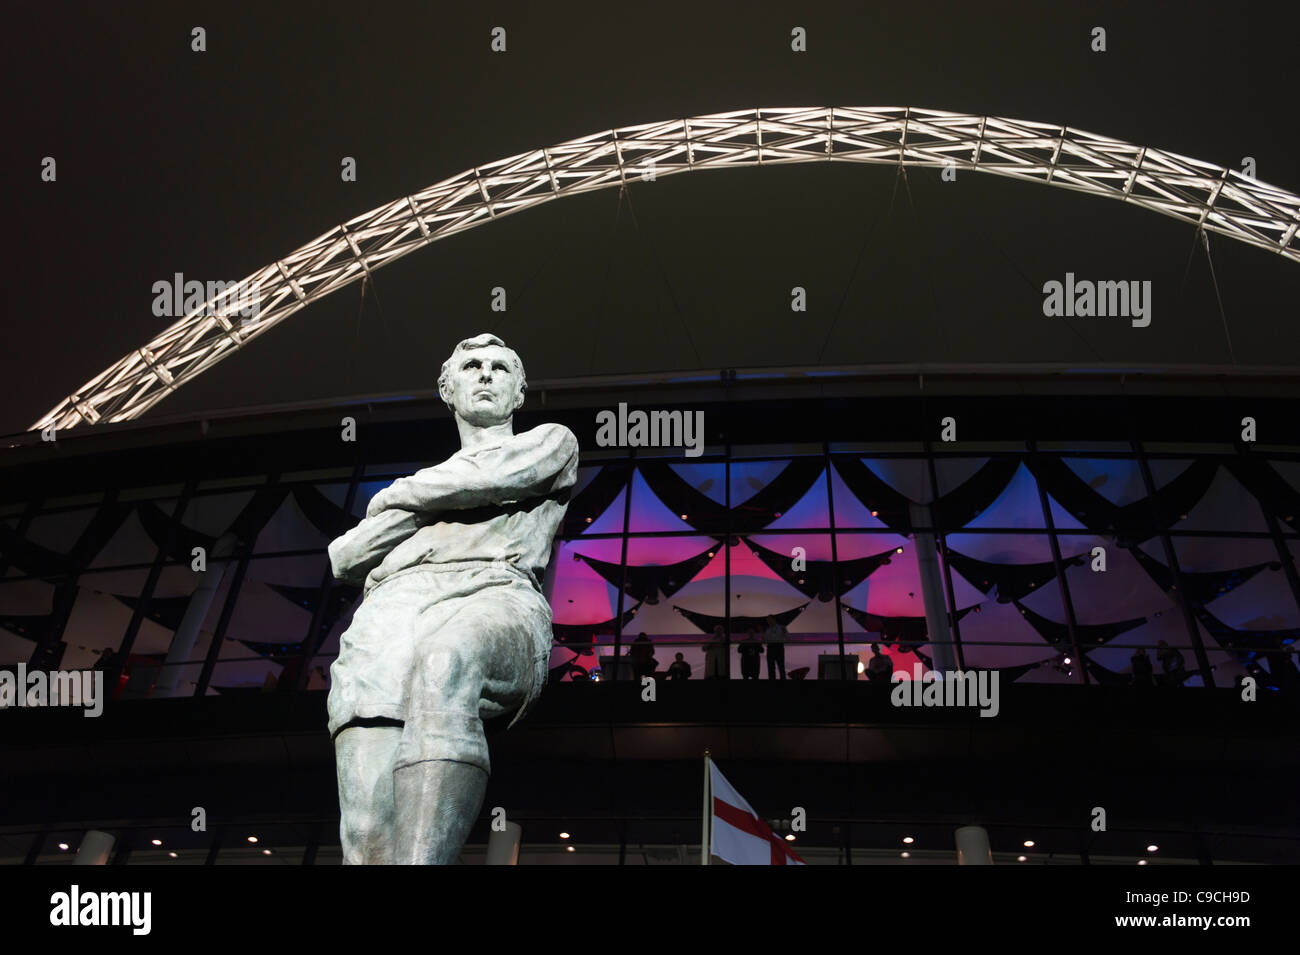 Statue of Bobby Moore outside the re-developed Wembley Stadium in London, illuminated at night. Stock Photo